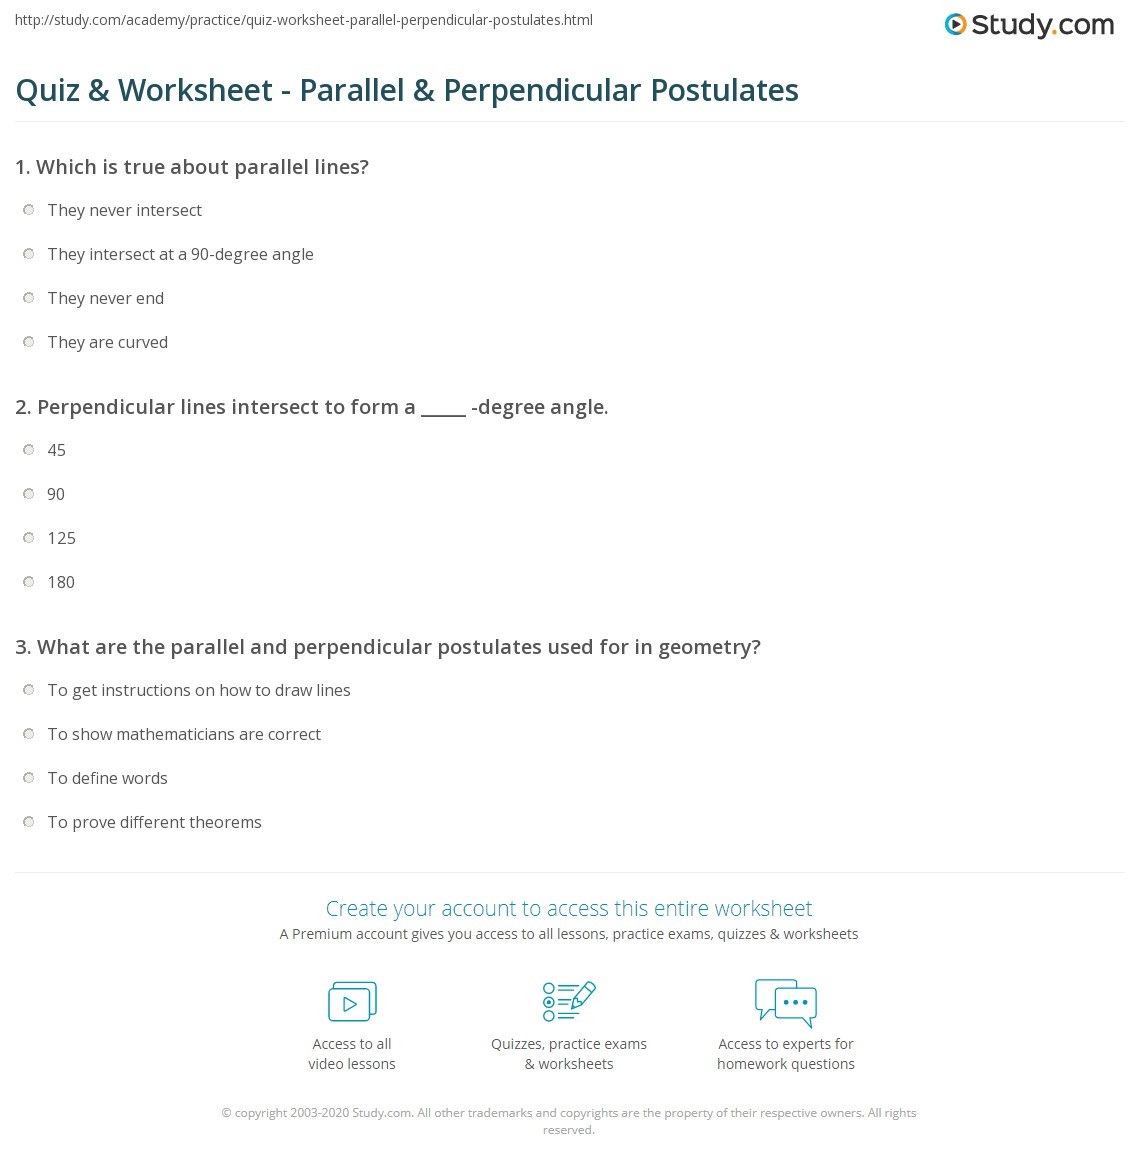 Parallel and Perpendicular Lines Worksheet Quiz &amp; Worksheet Parallel &amp; Perpendicular Postulates